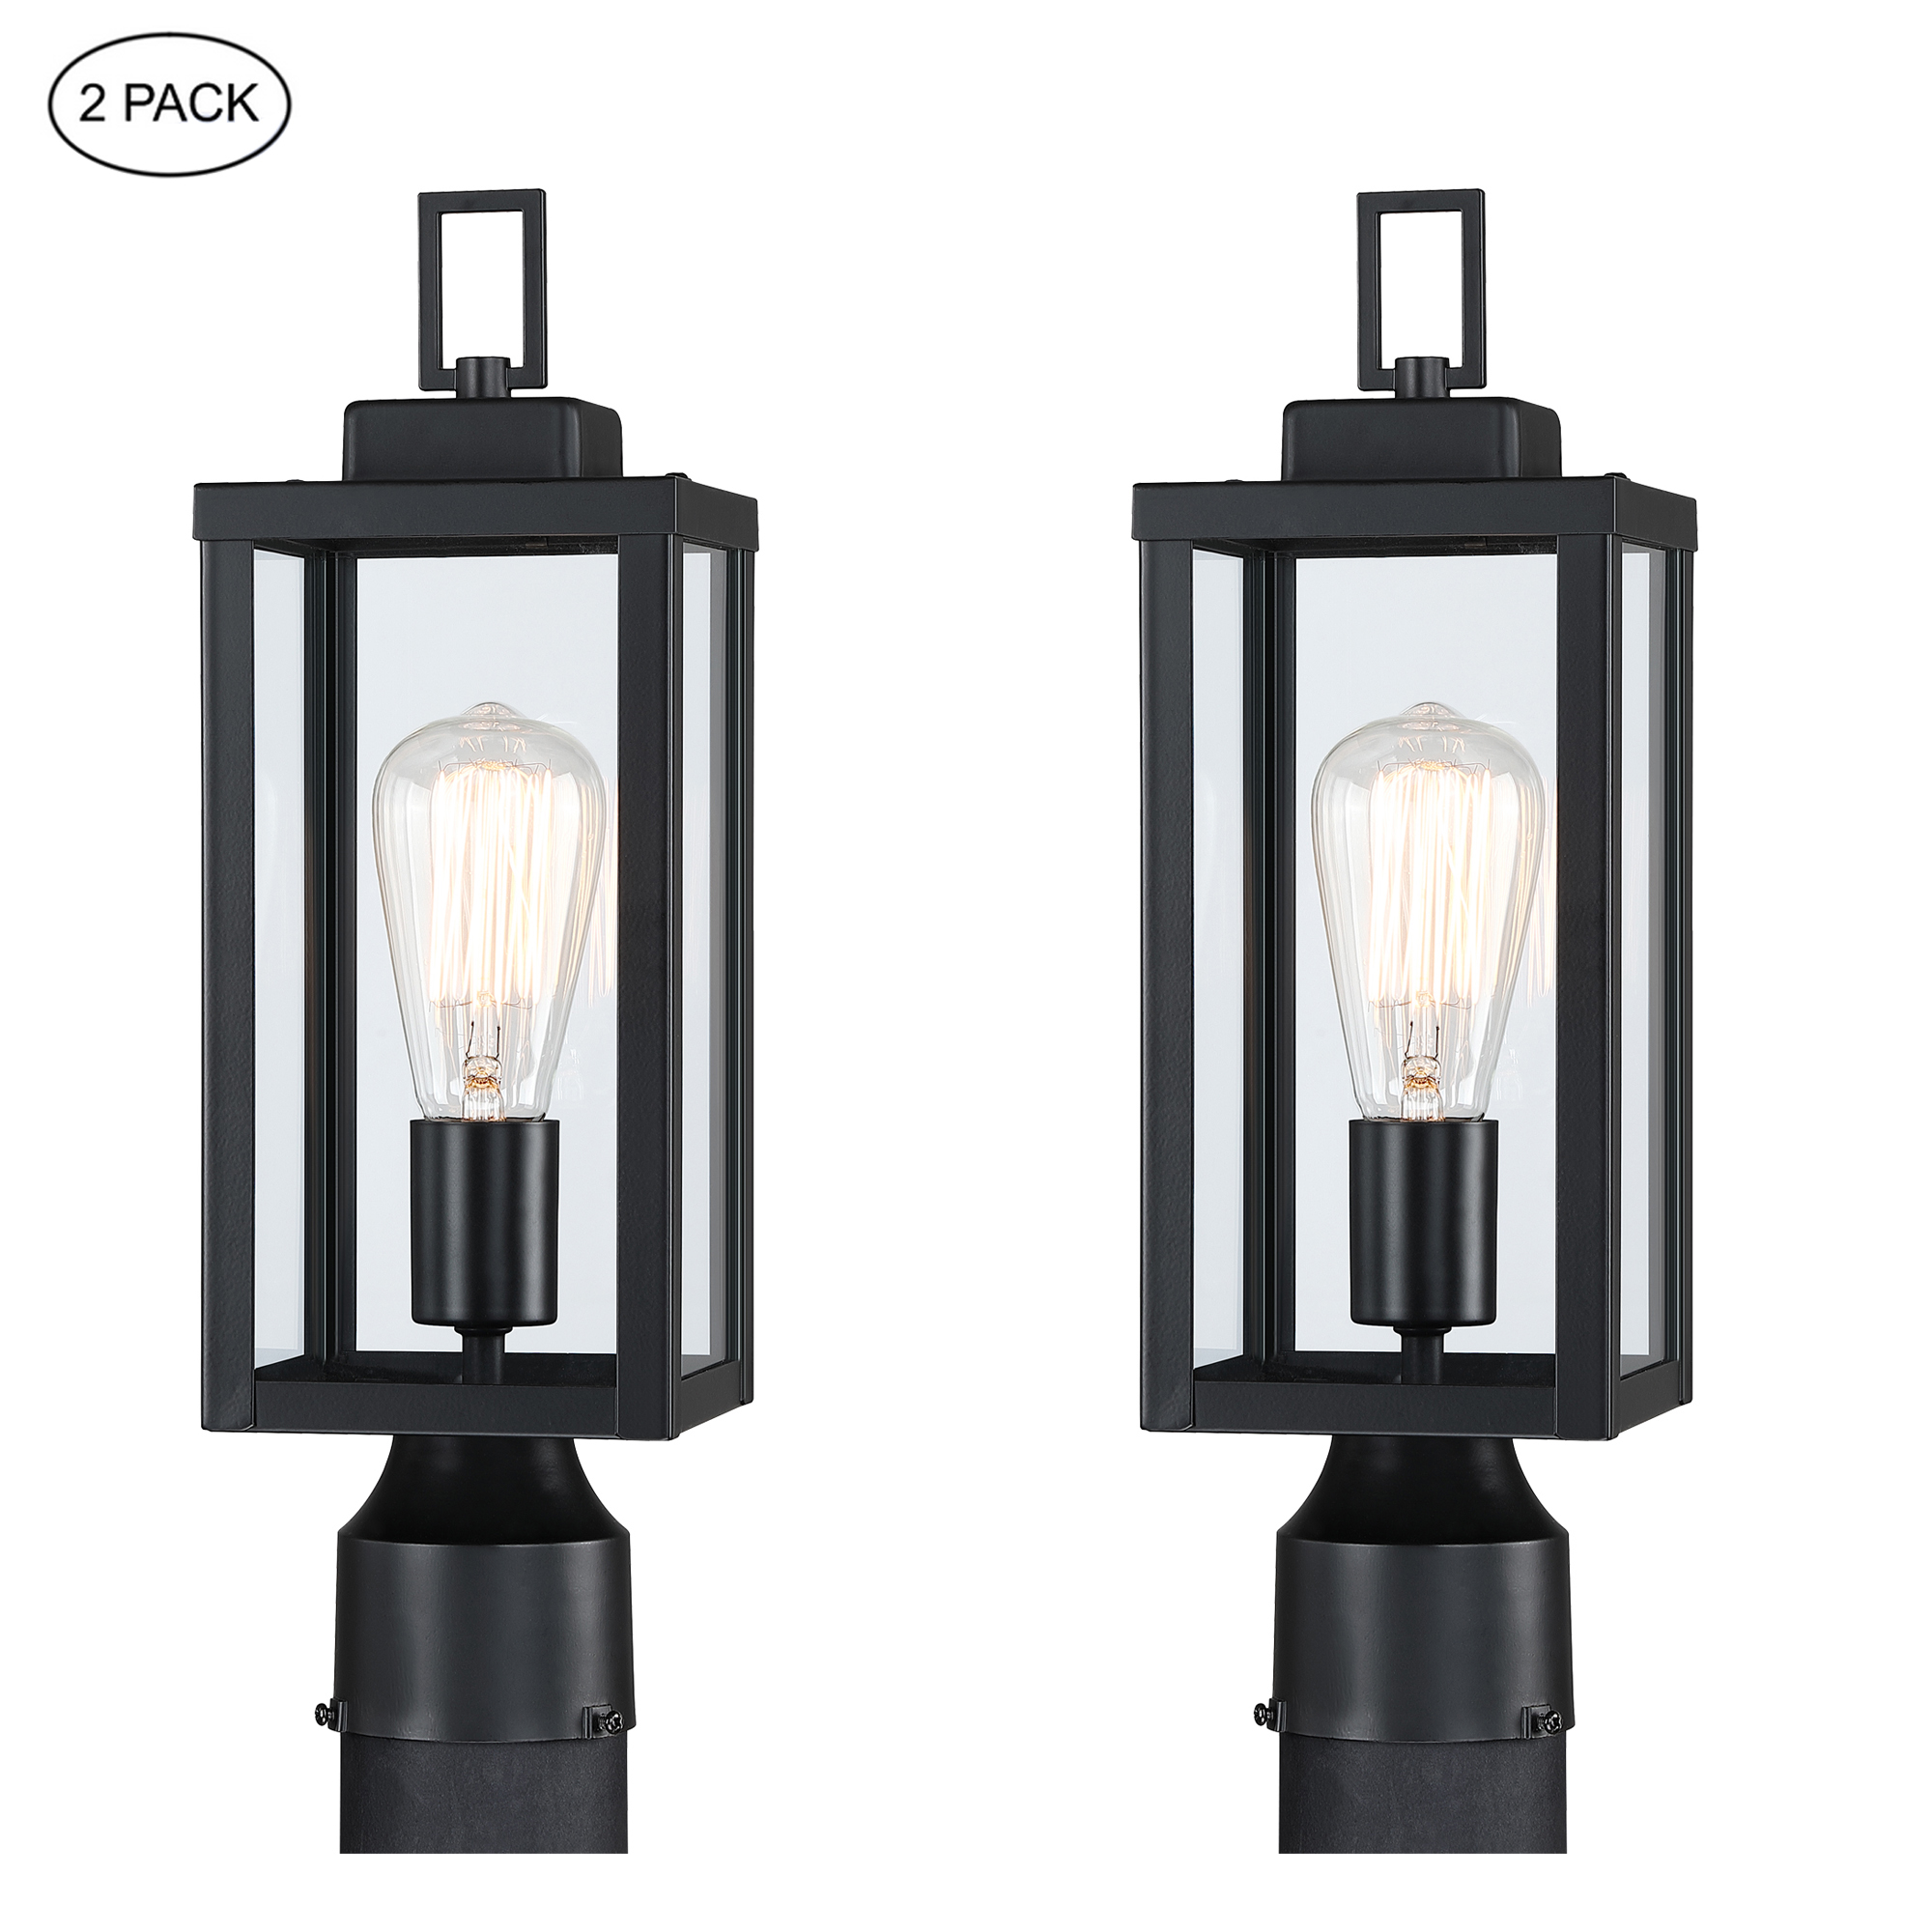 16.5 inch Post Lighting Kits Head Pier Mount Outdoor Light Fixtures with Matte  Black Finished and Clear Glass Lantern Shade（2-Pack）